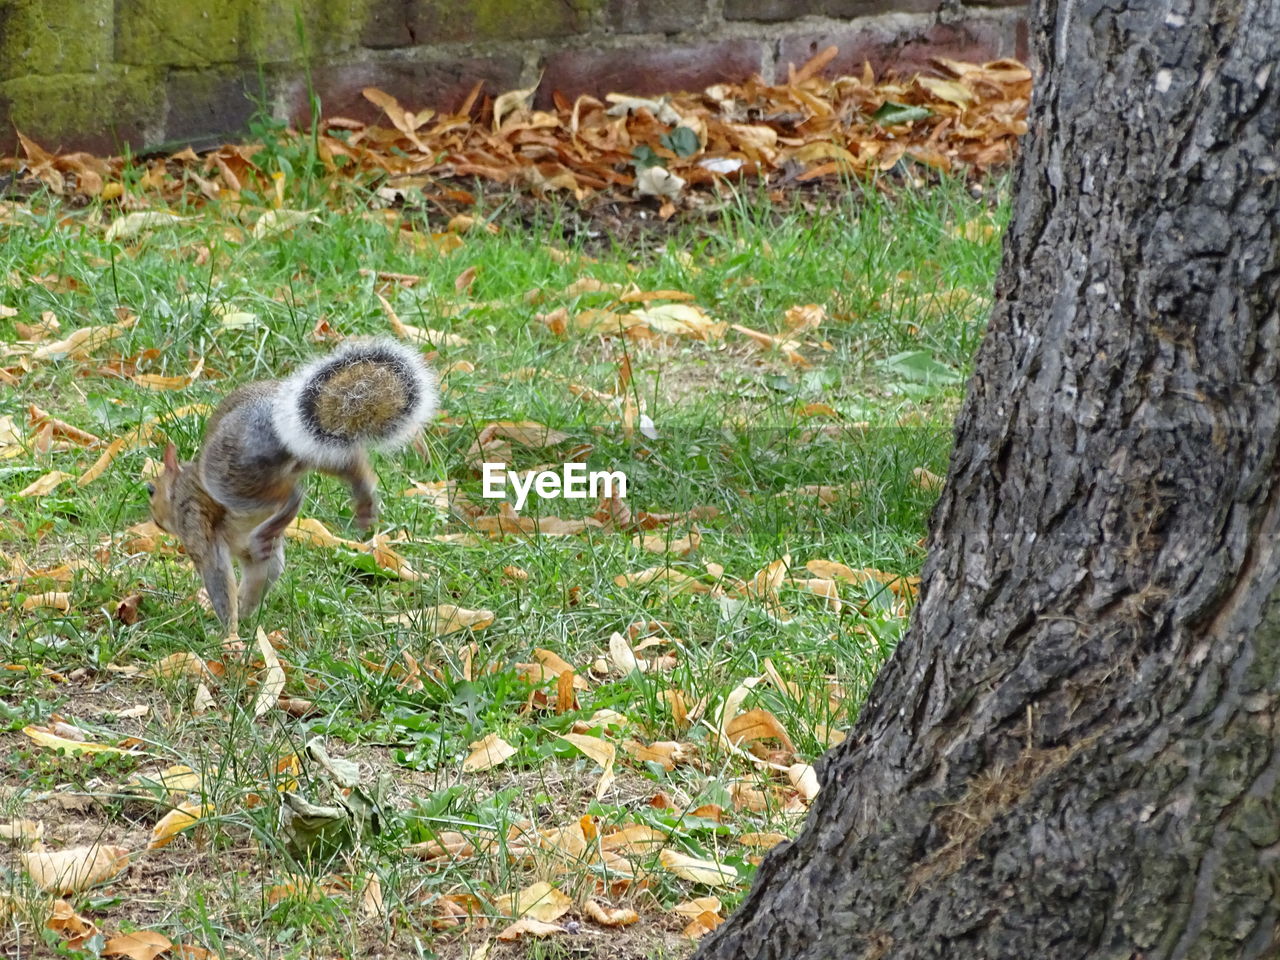 VIEW OF SQUIRREL ON TREE